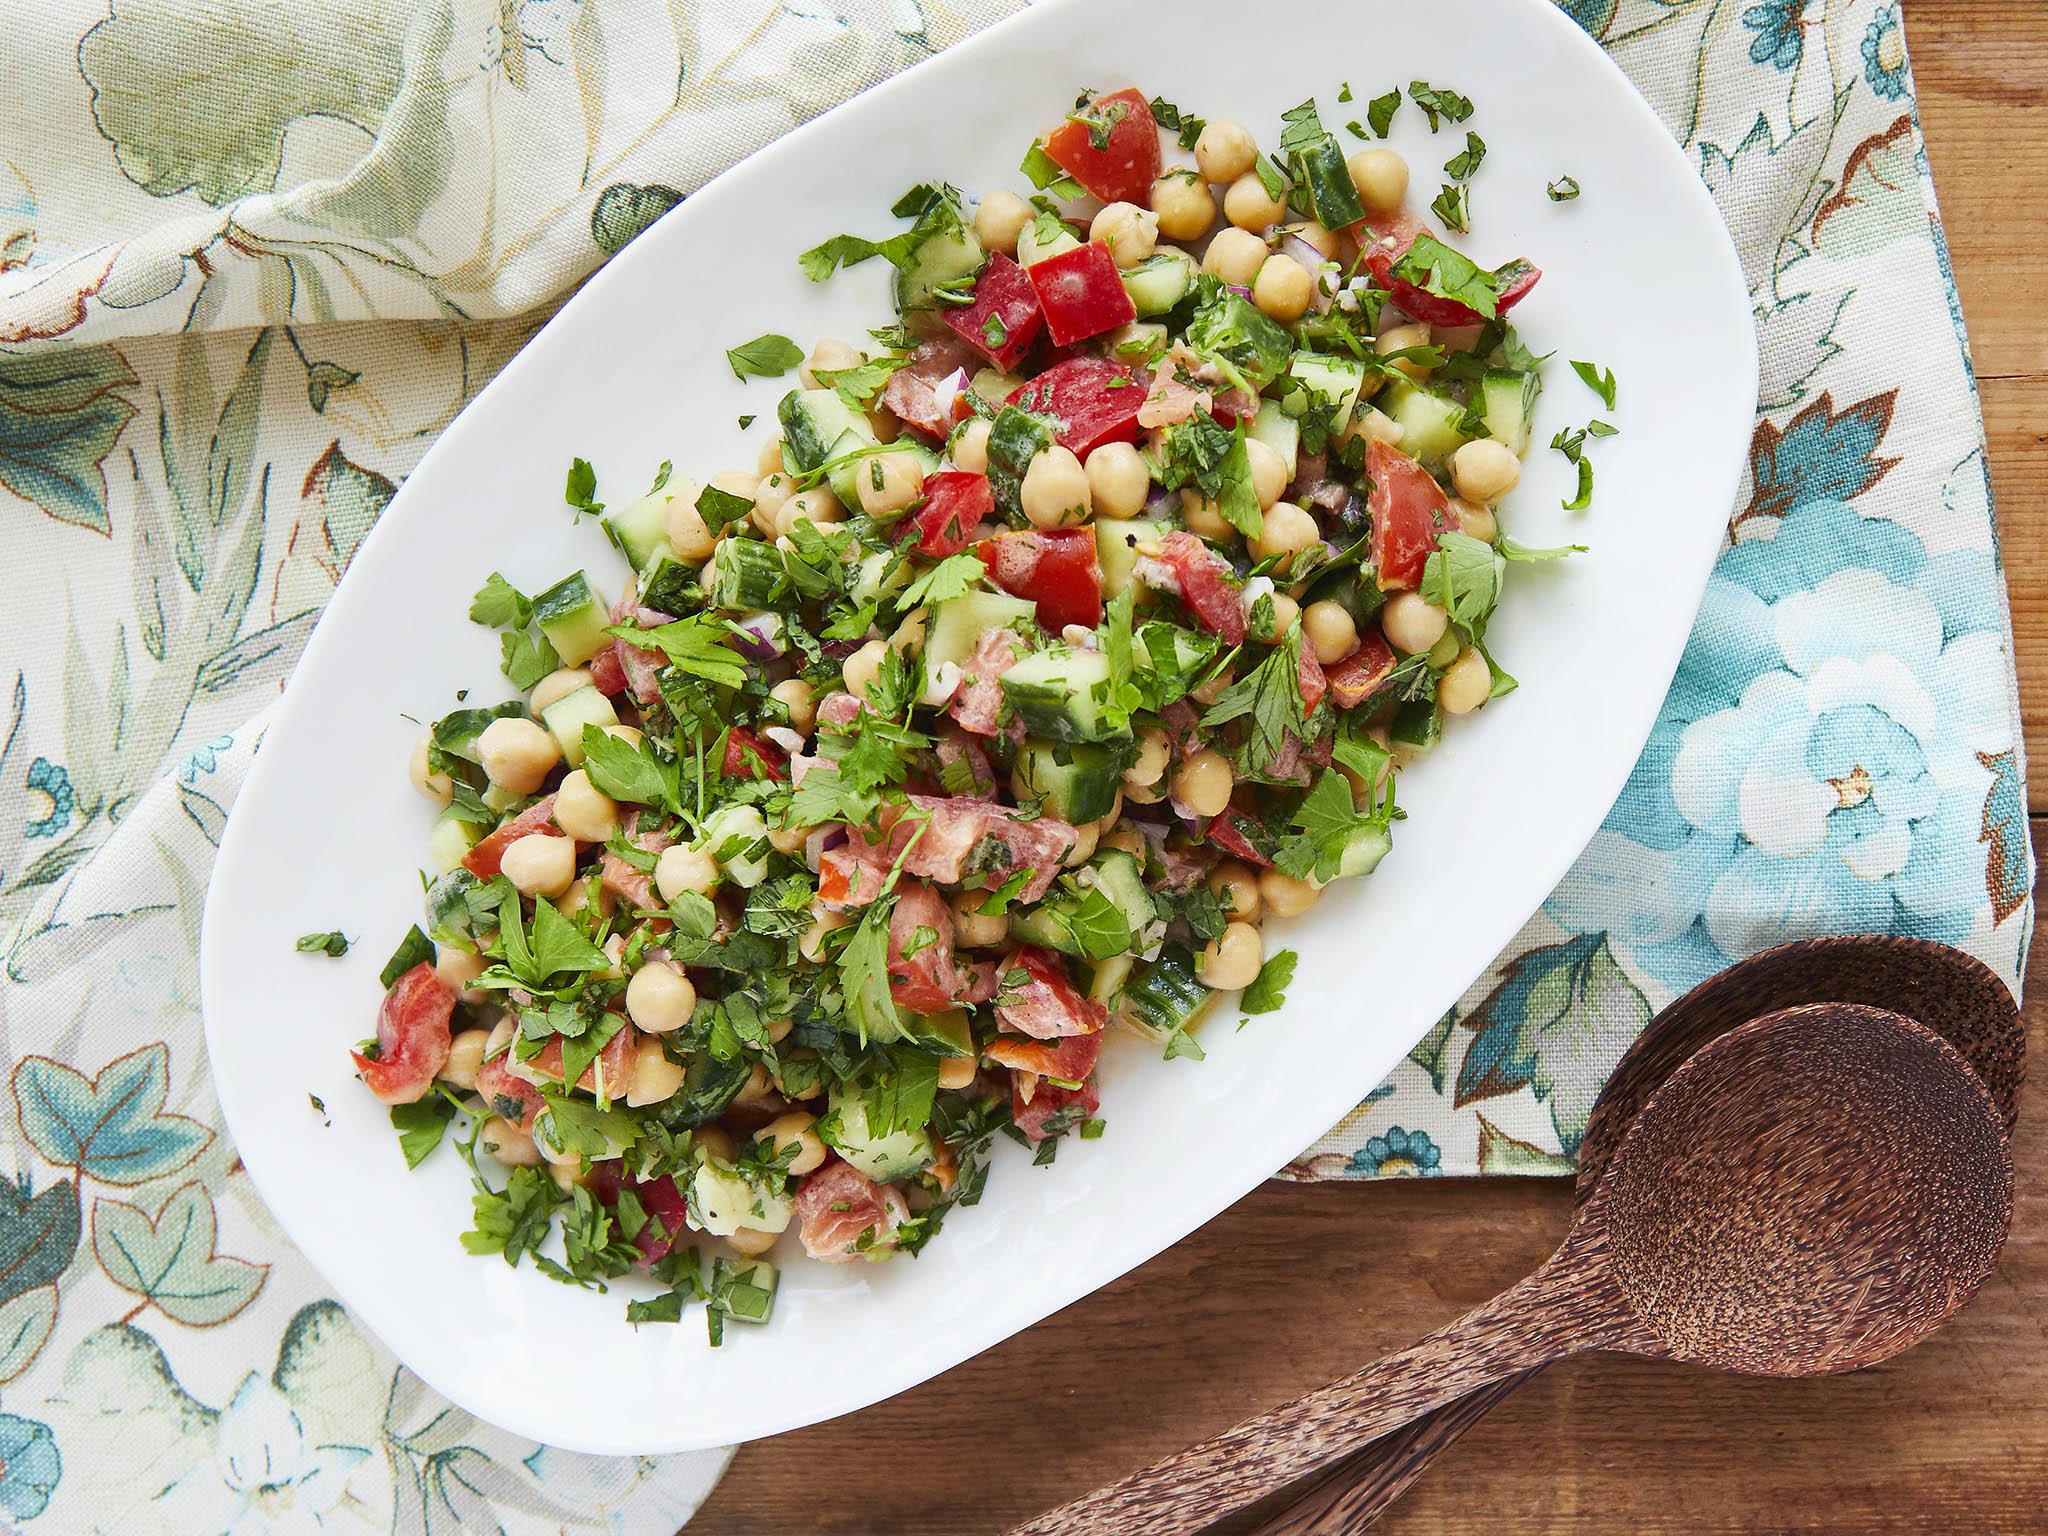 Work the legume: It takes minimal effort to create this bright and summery dish